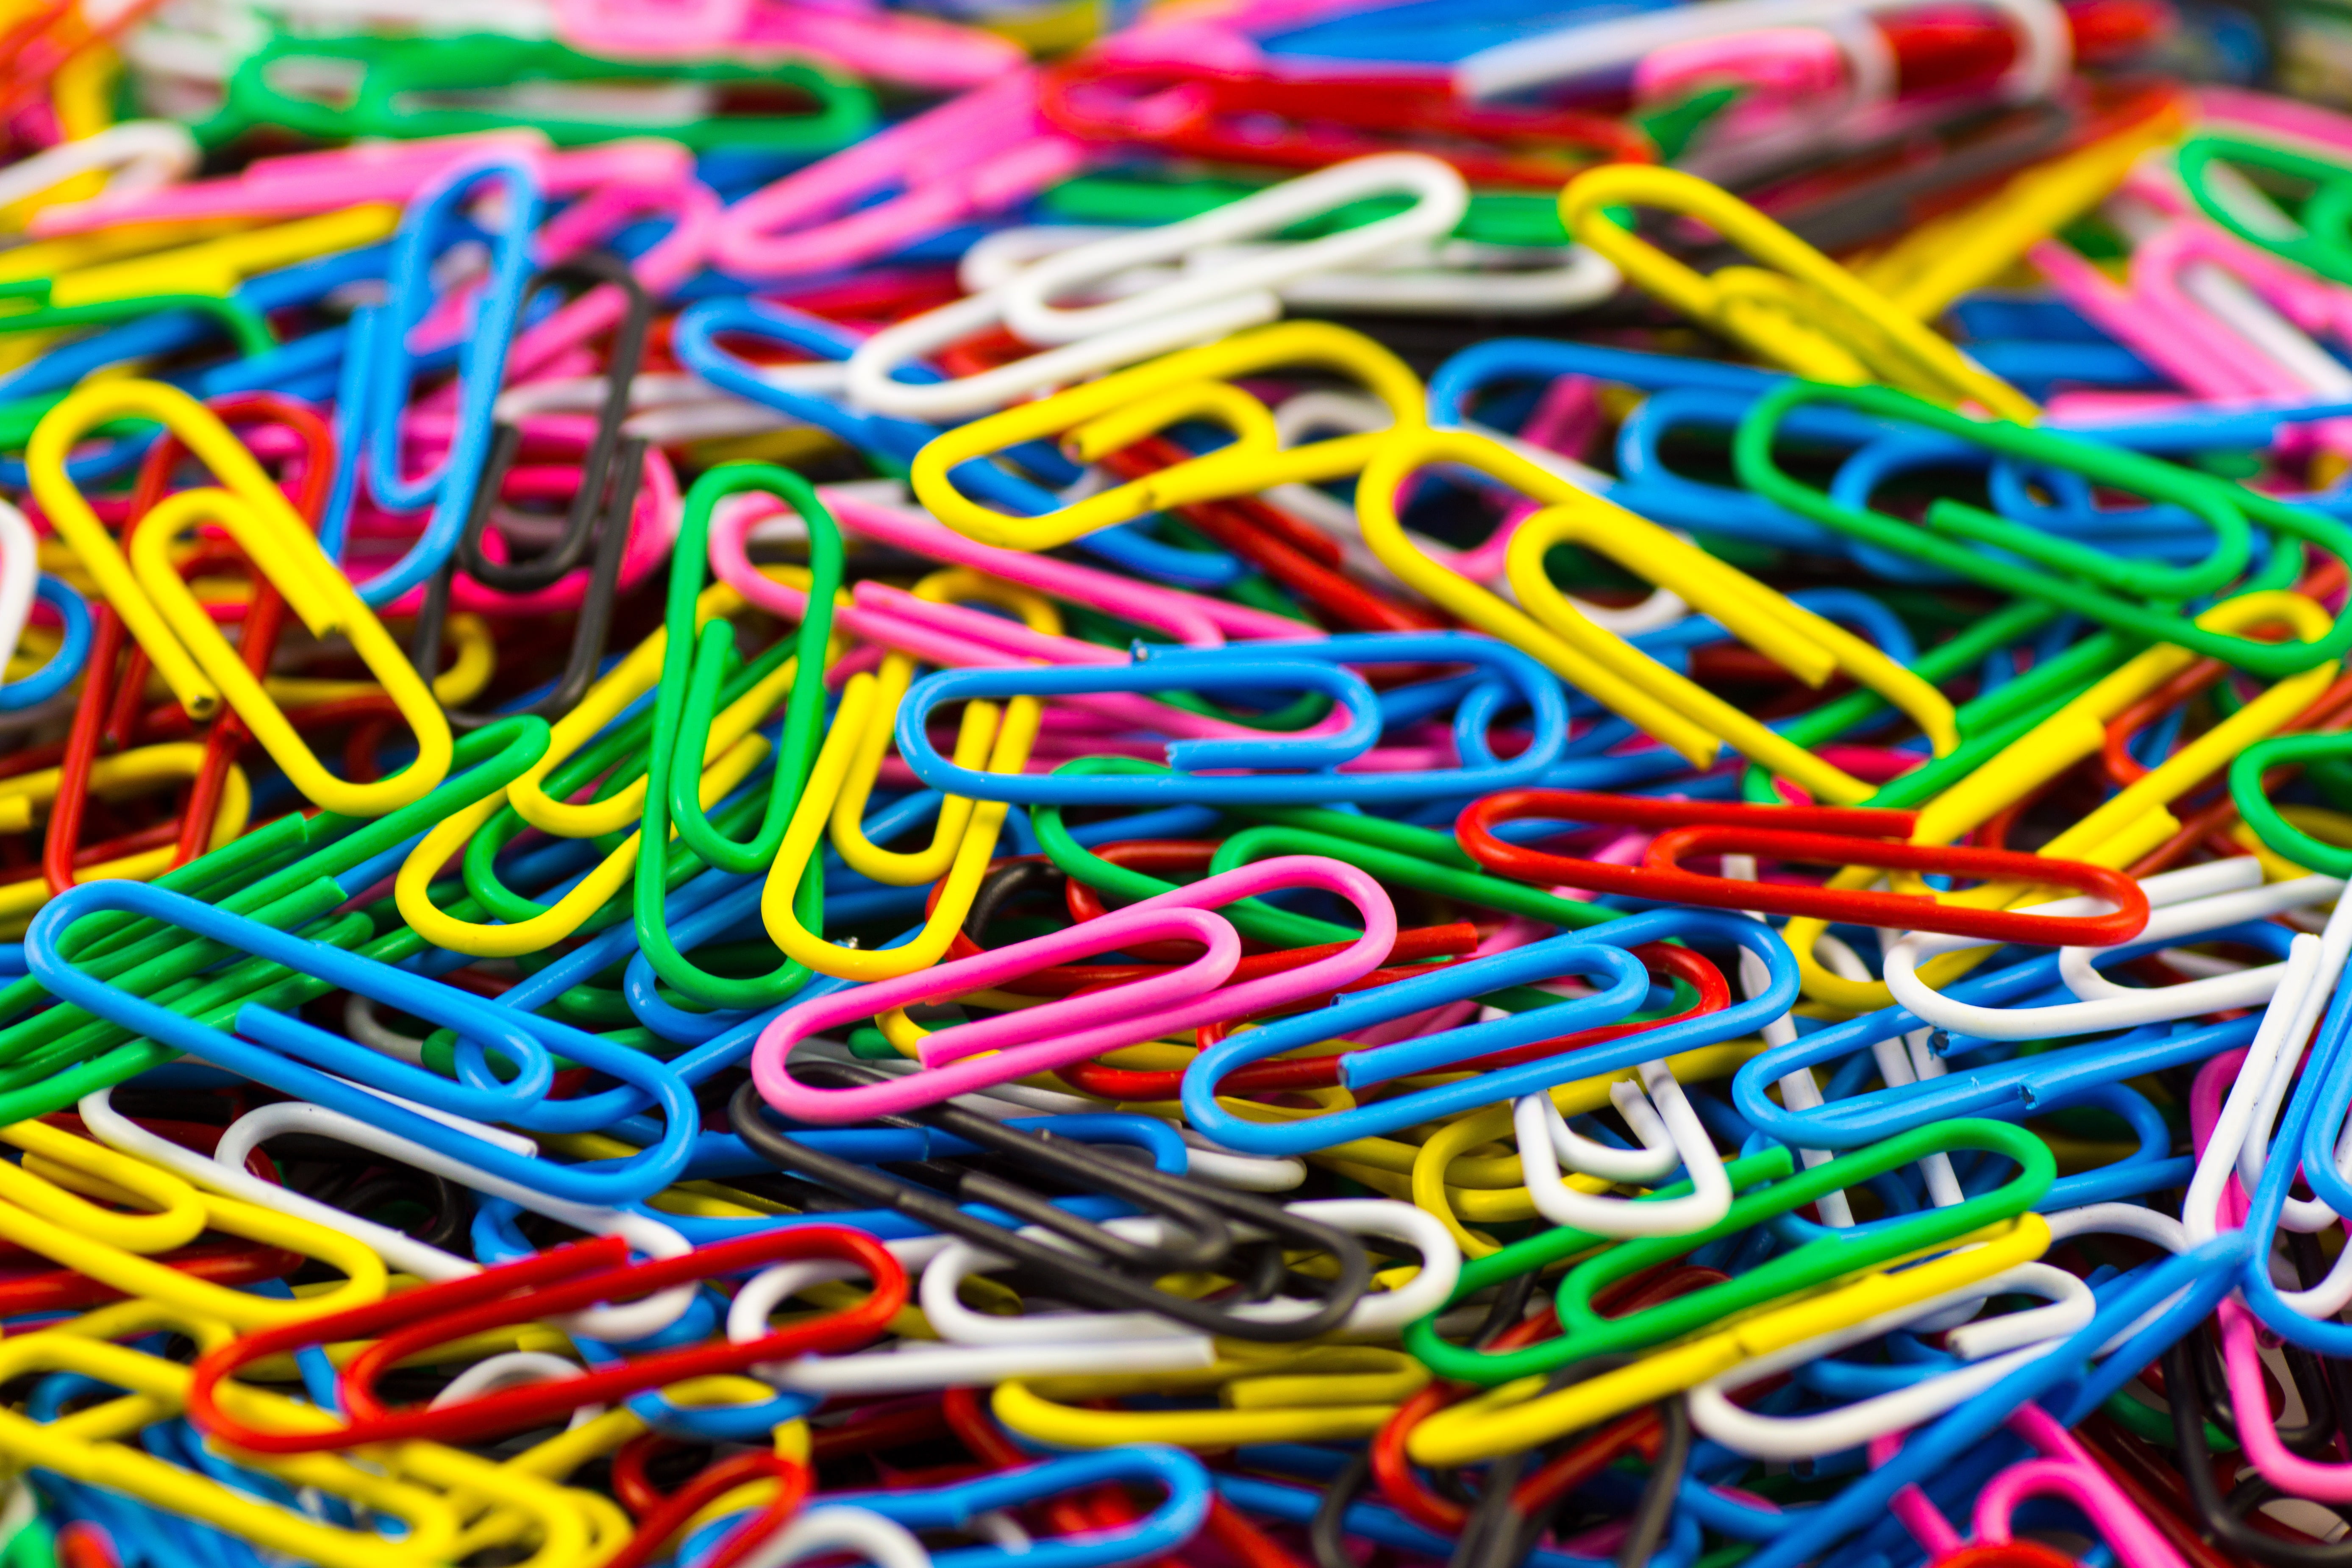 Selective Photograph Of Paper Clips HD Wallpaper